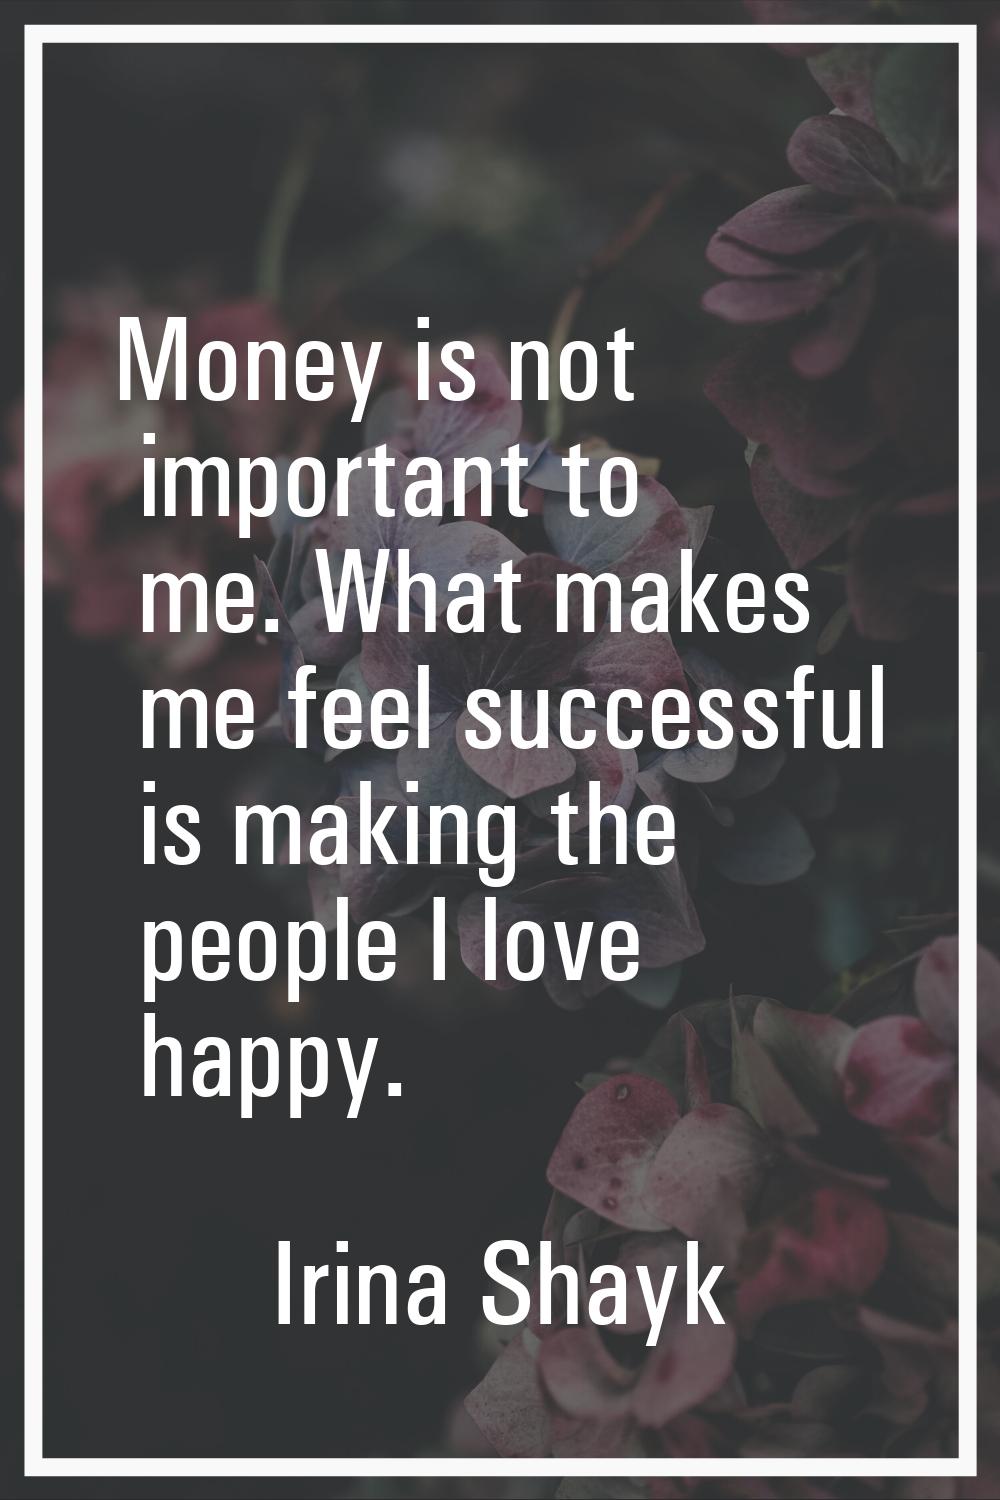 Money is not important to me. What makes me feel successful is making the people I love happy.